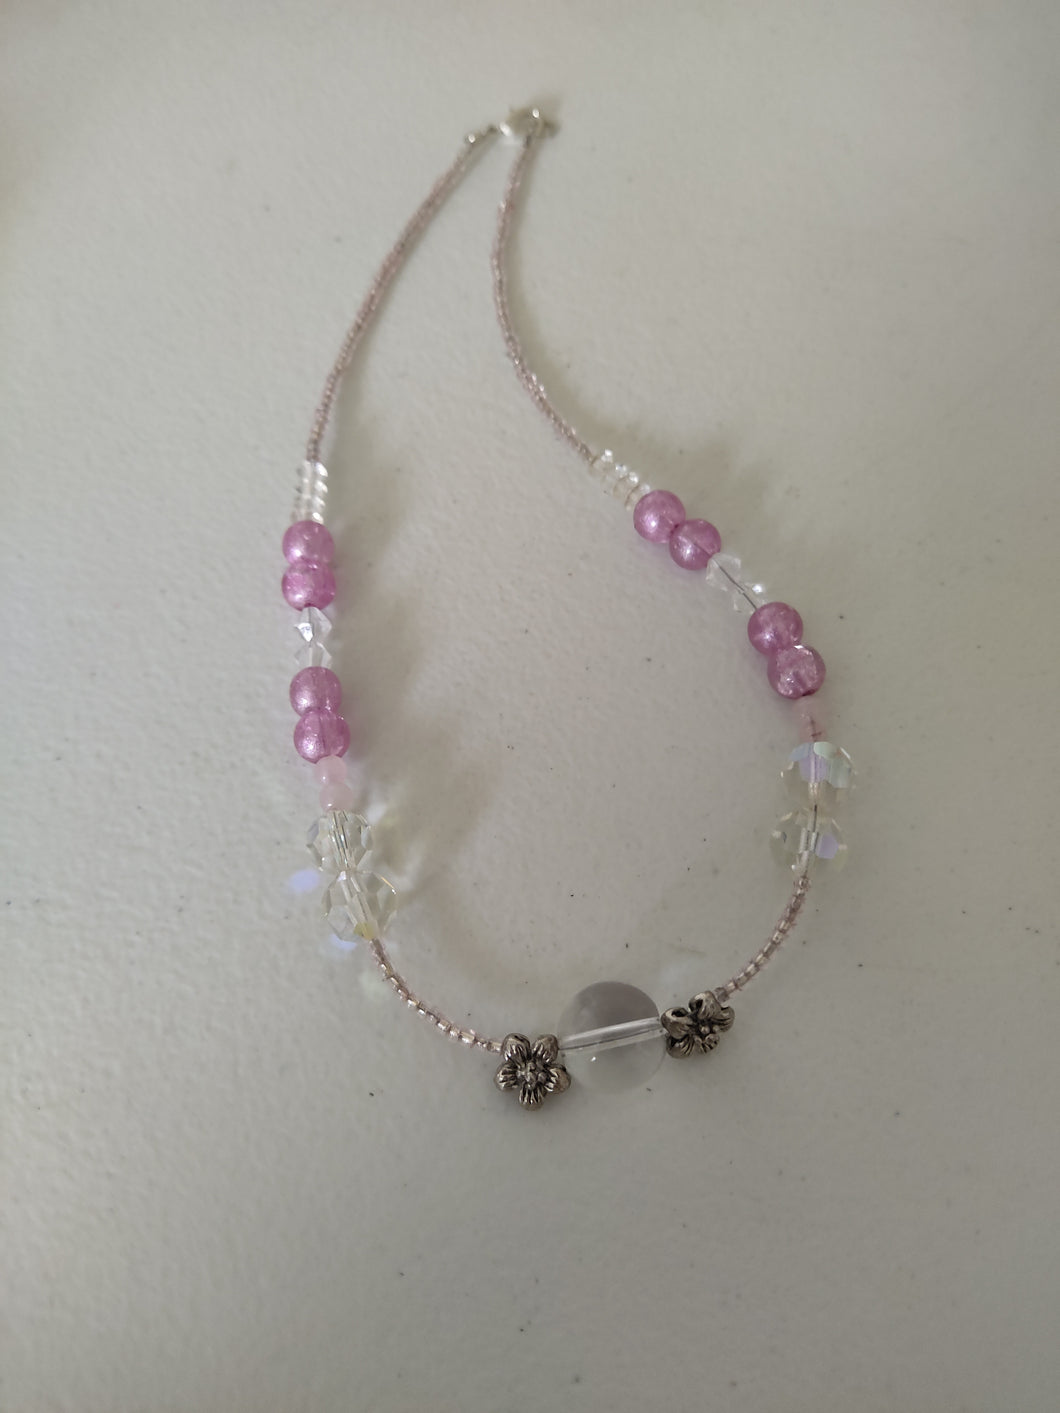 Beaded Glass Necklace